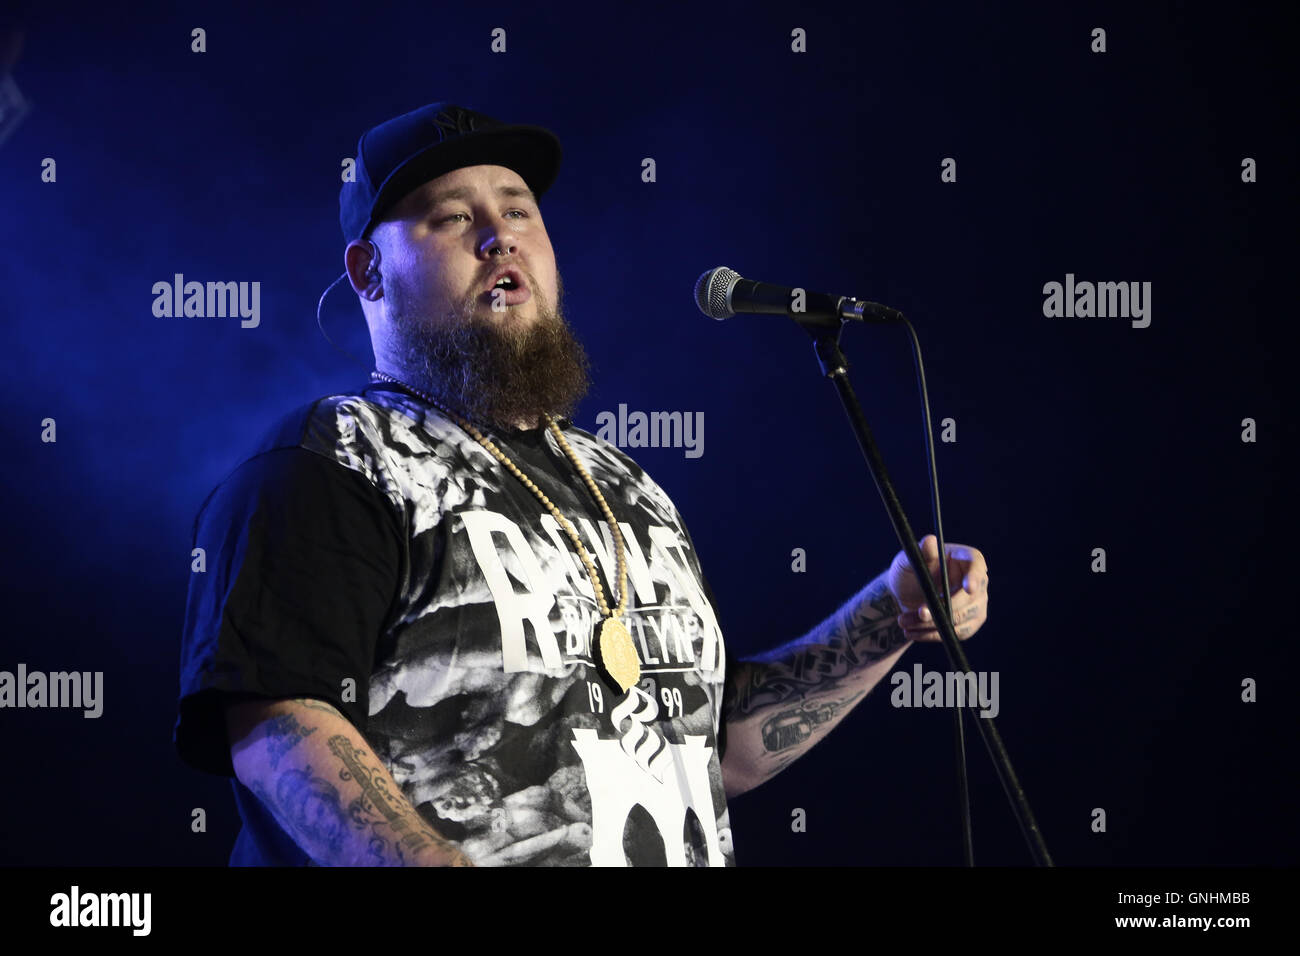 Rory Graham (stage name Rag 'N' Bone Man) performing live on the NME ...